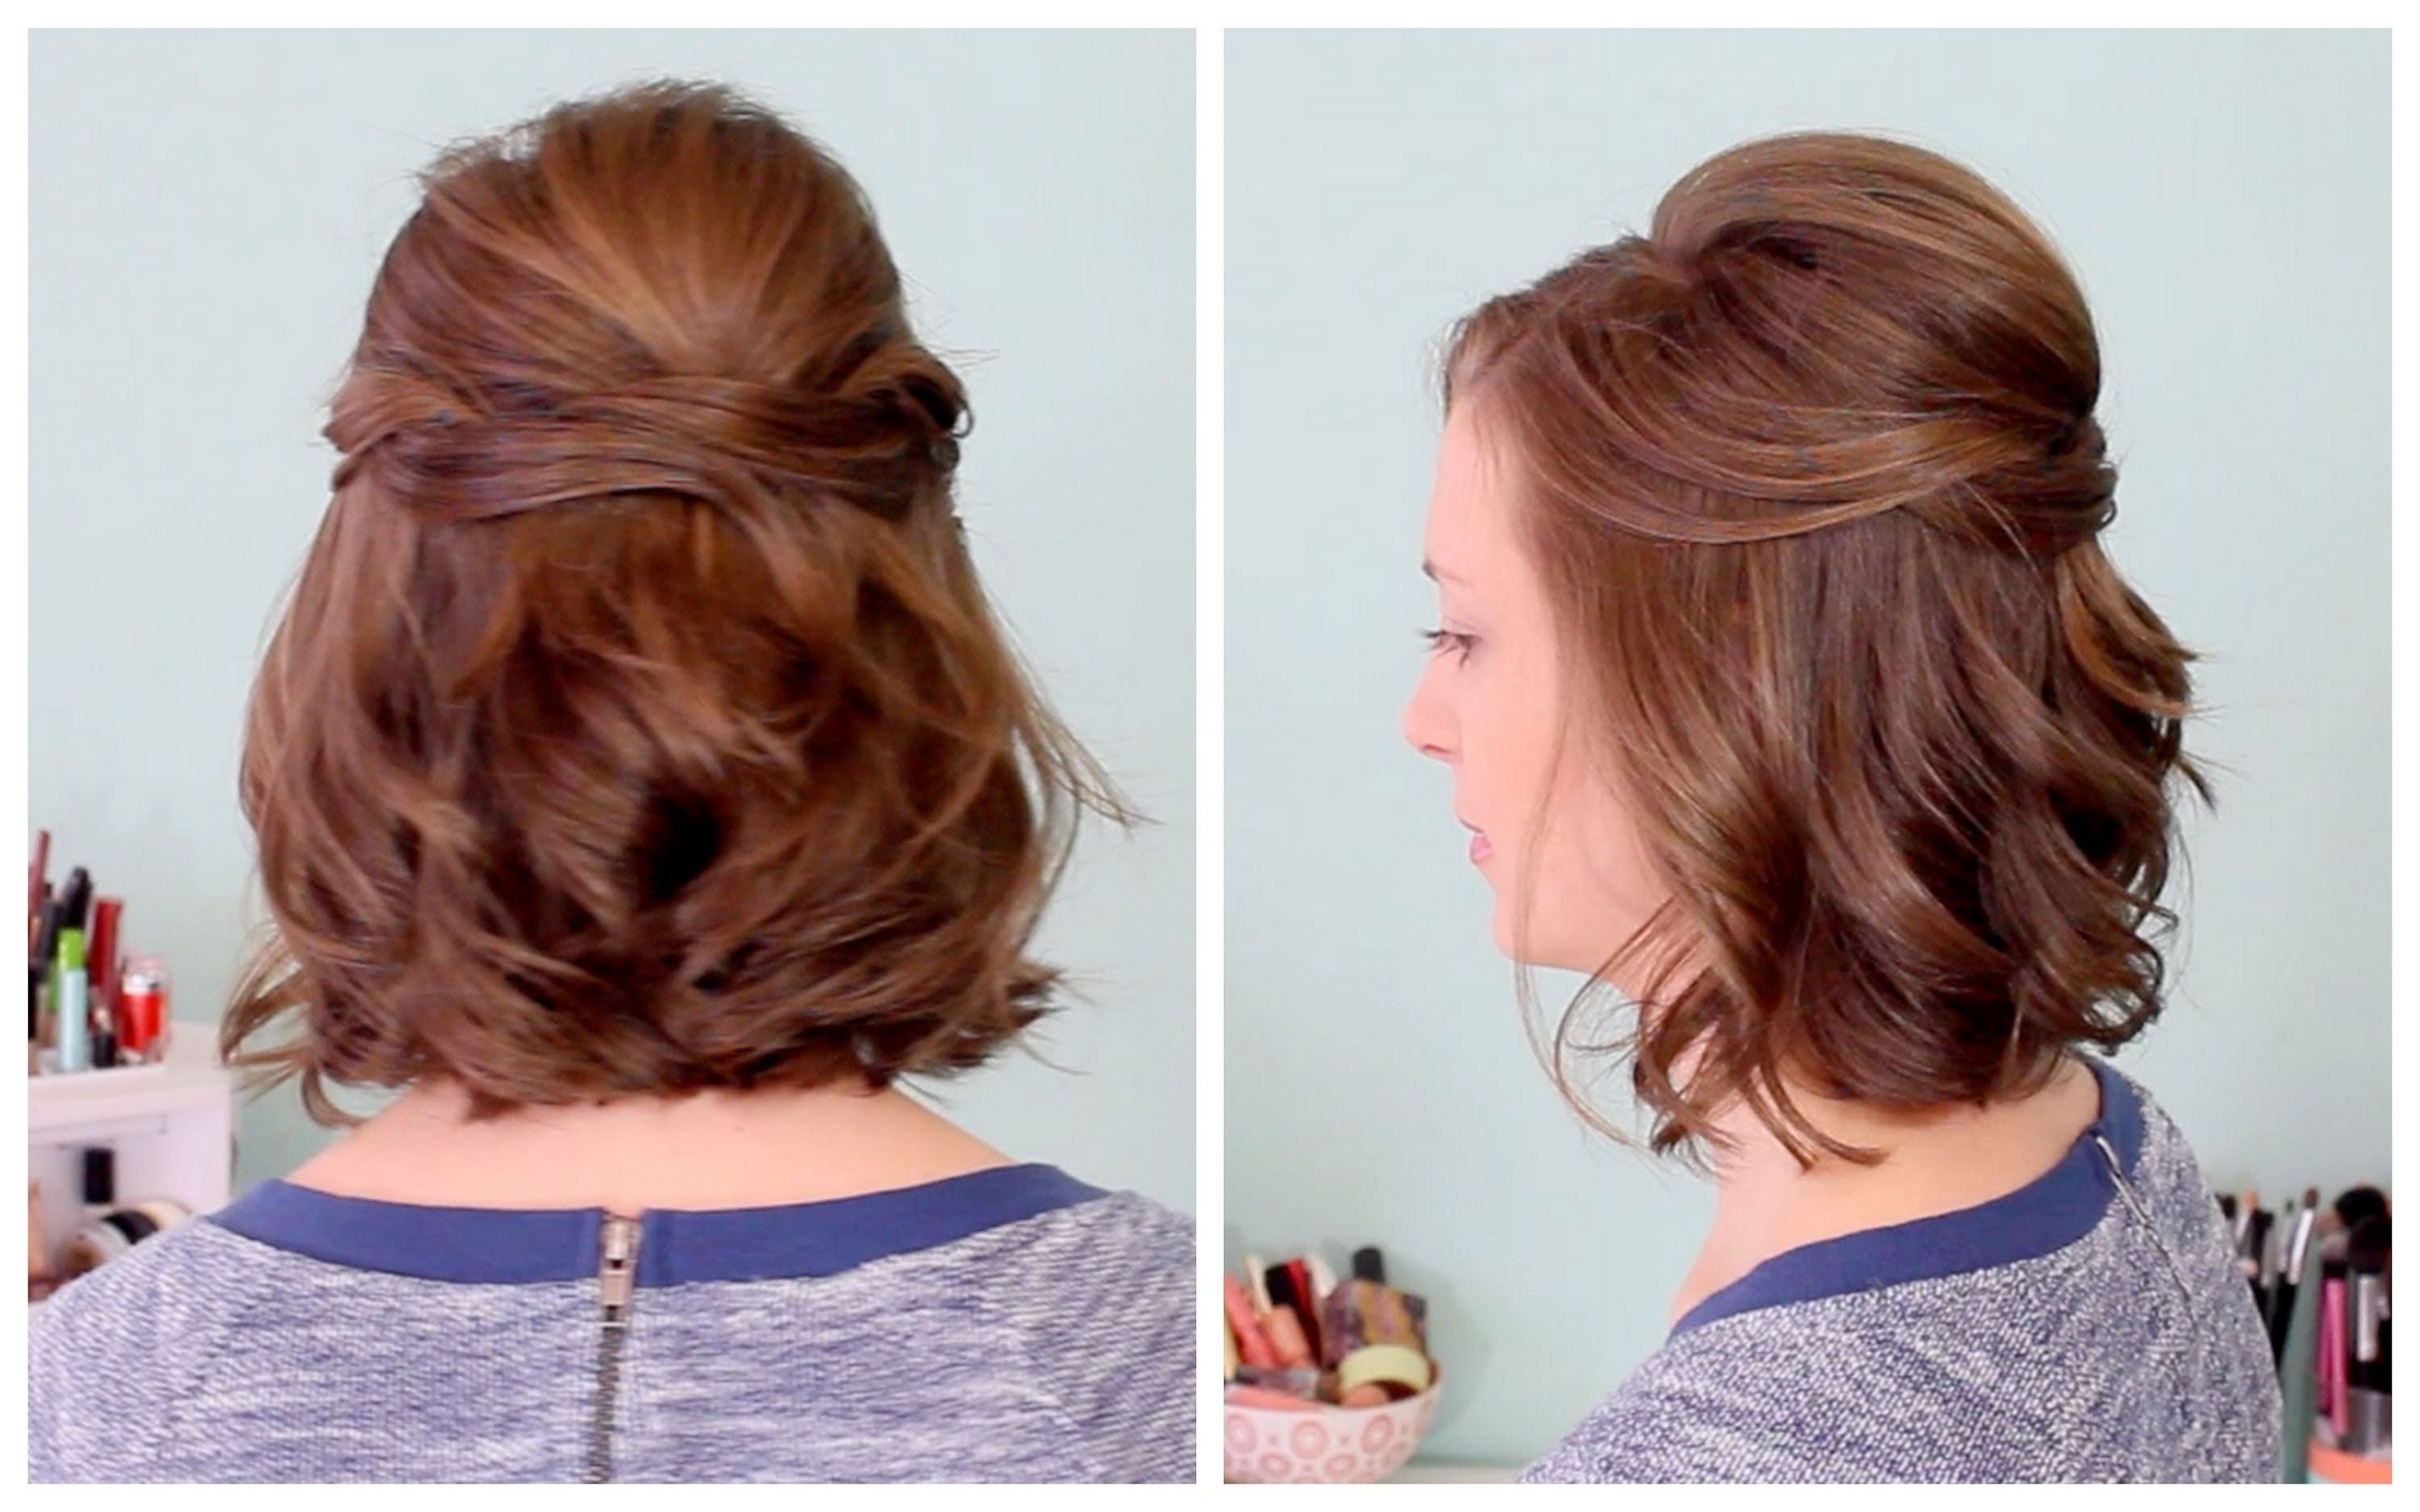 Mesmerizing Half Up Bridesmaid Hairstyles In Wedding Hairstyle For Intended For Current Wedding Dinner Hairstyle For Short Hair (View 6 of 15)